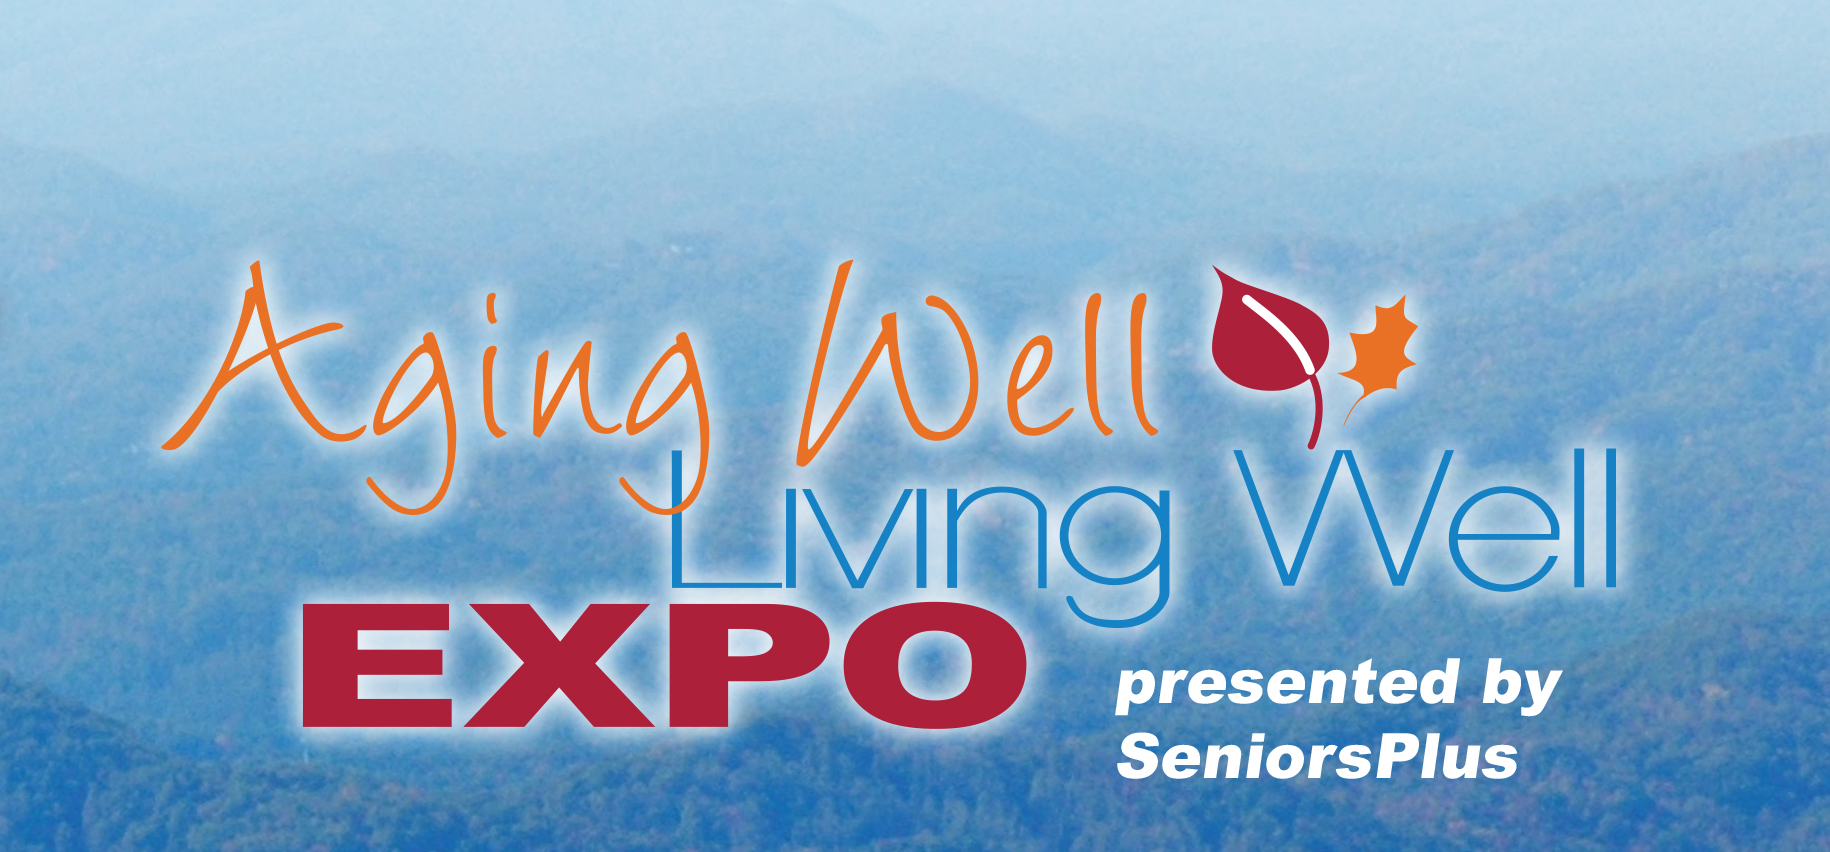 Changes announced for Aging Well Expo